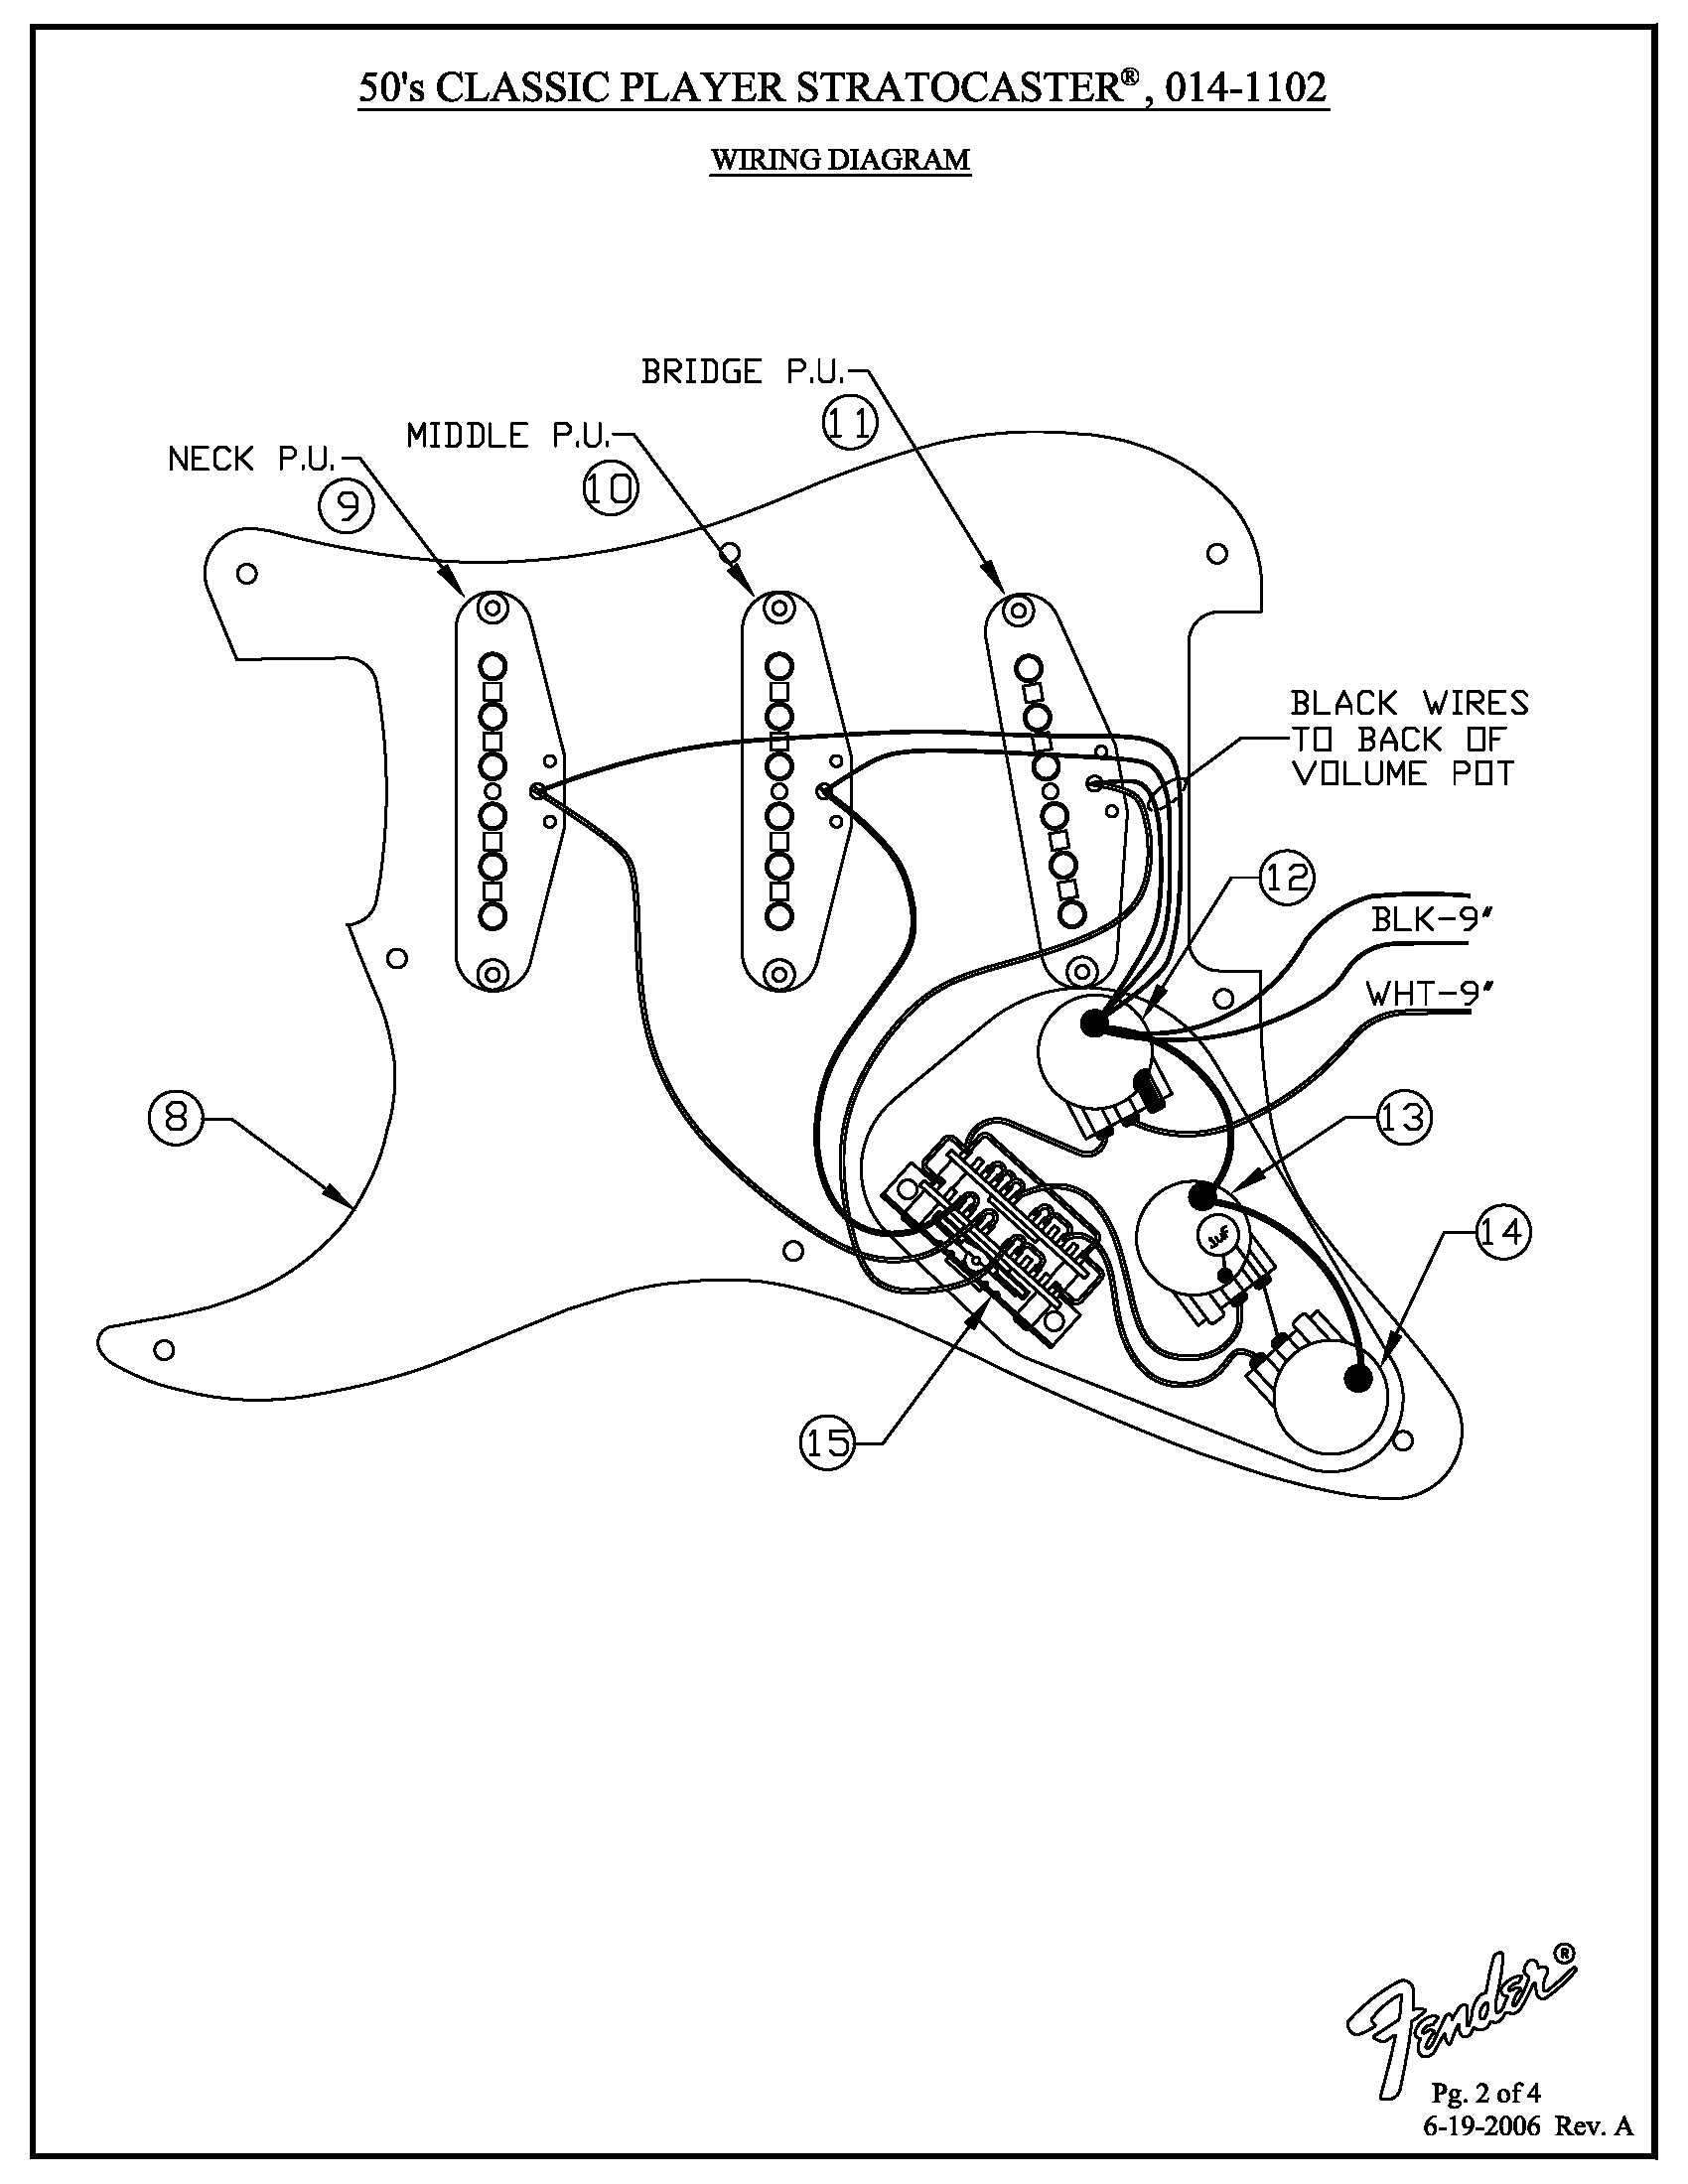 50's Classic Player Stratocaster, 0141102 Wiring Diagram · Customer